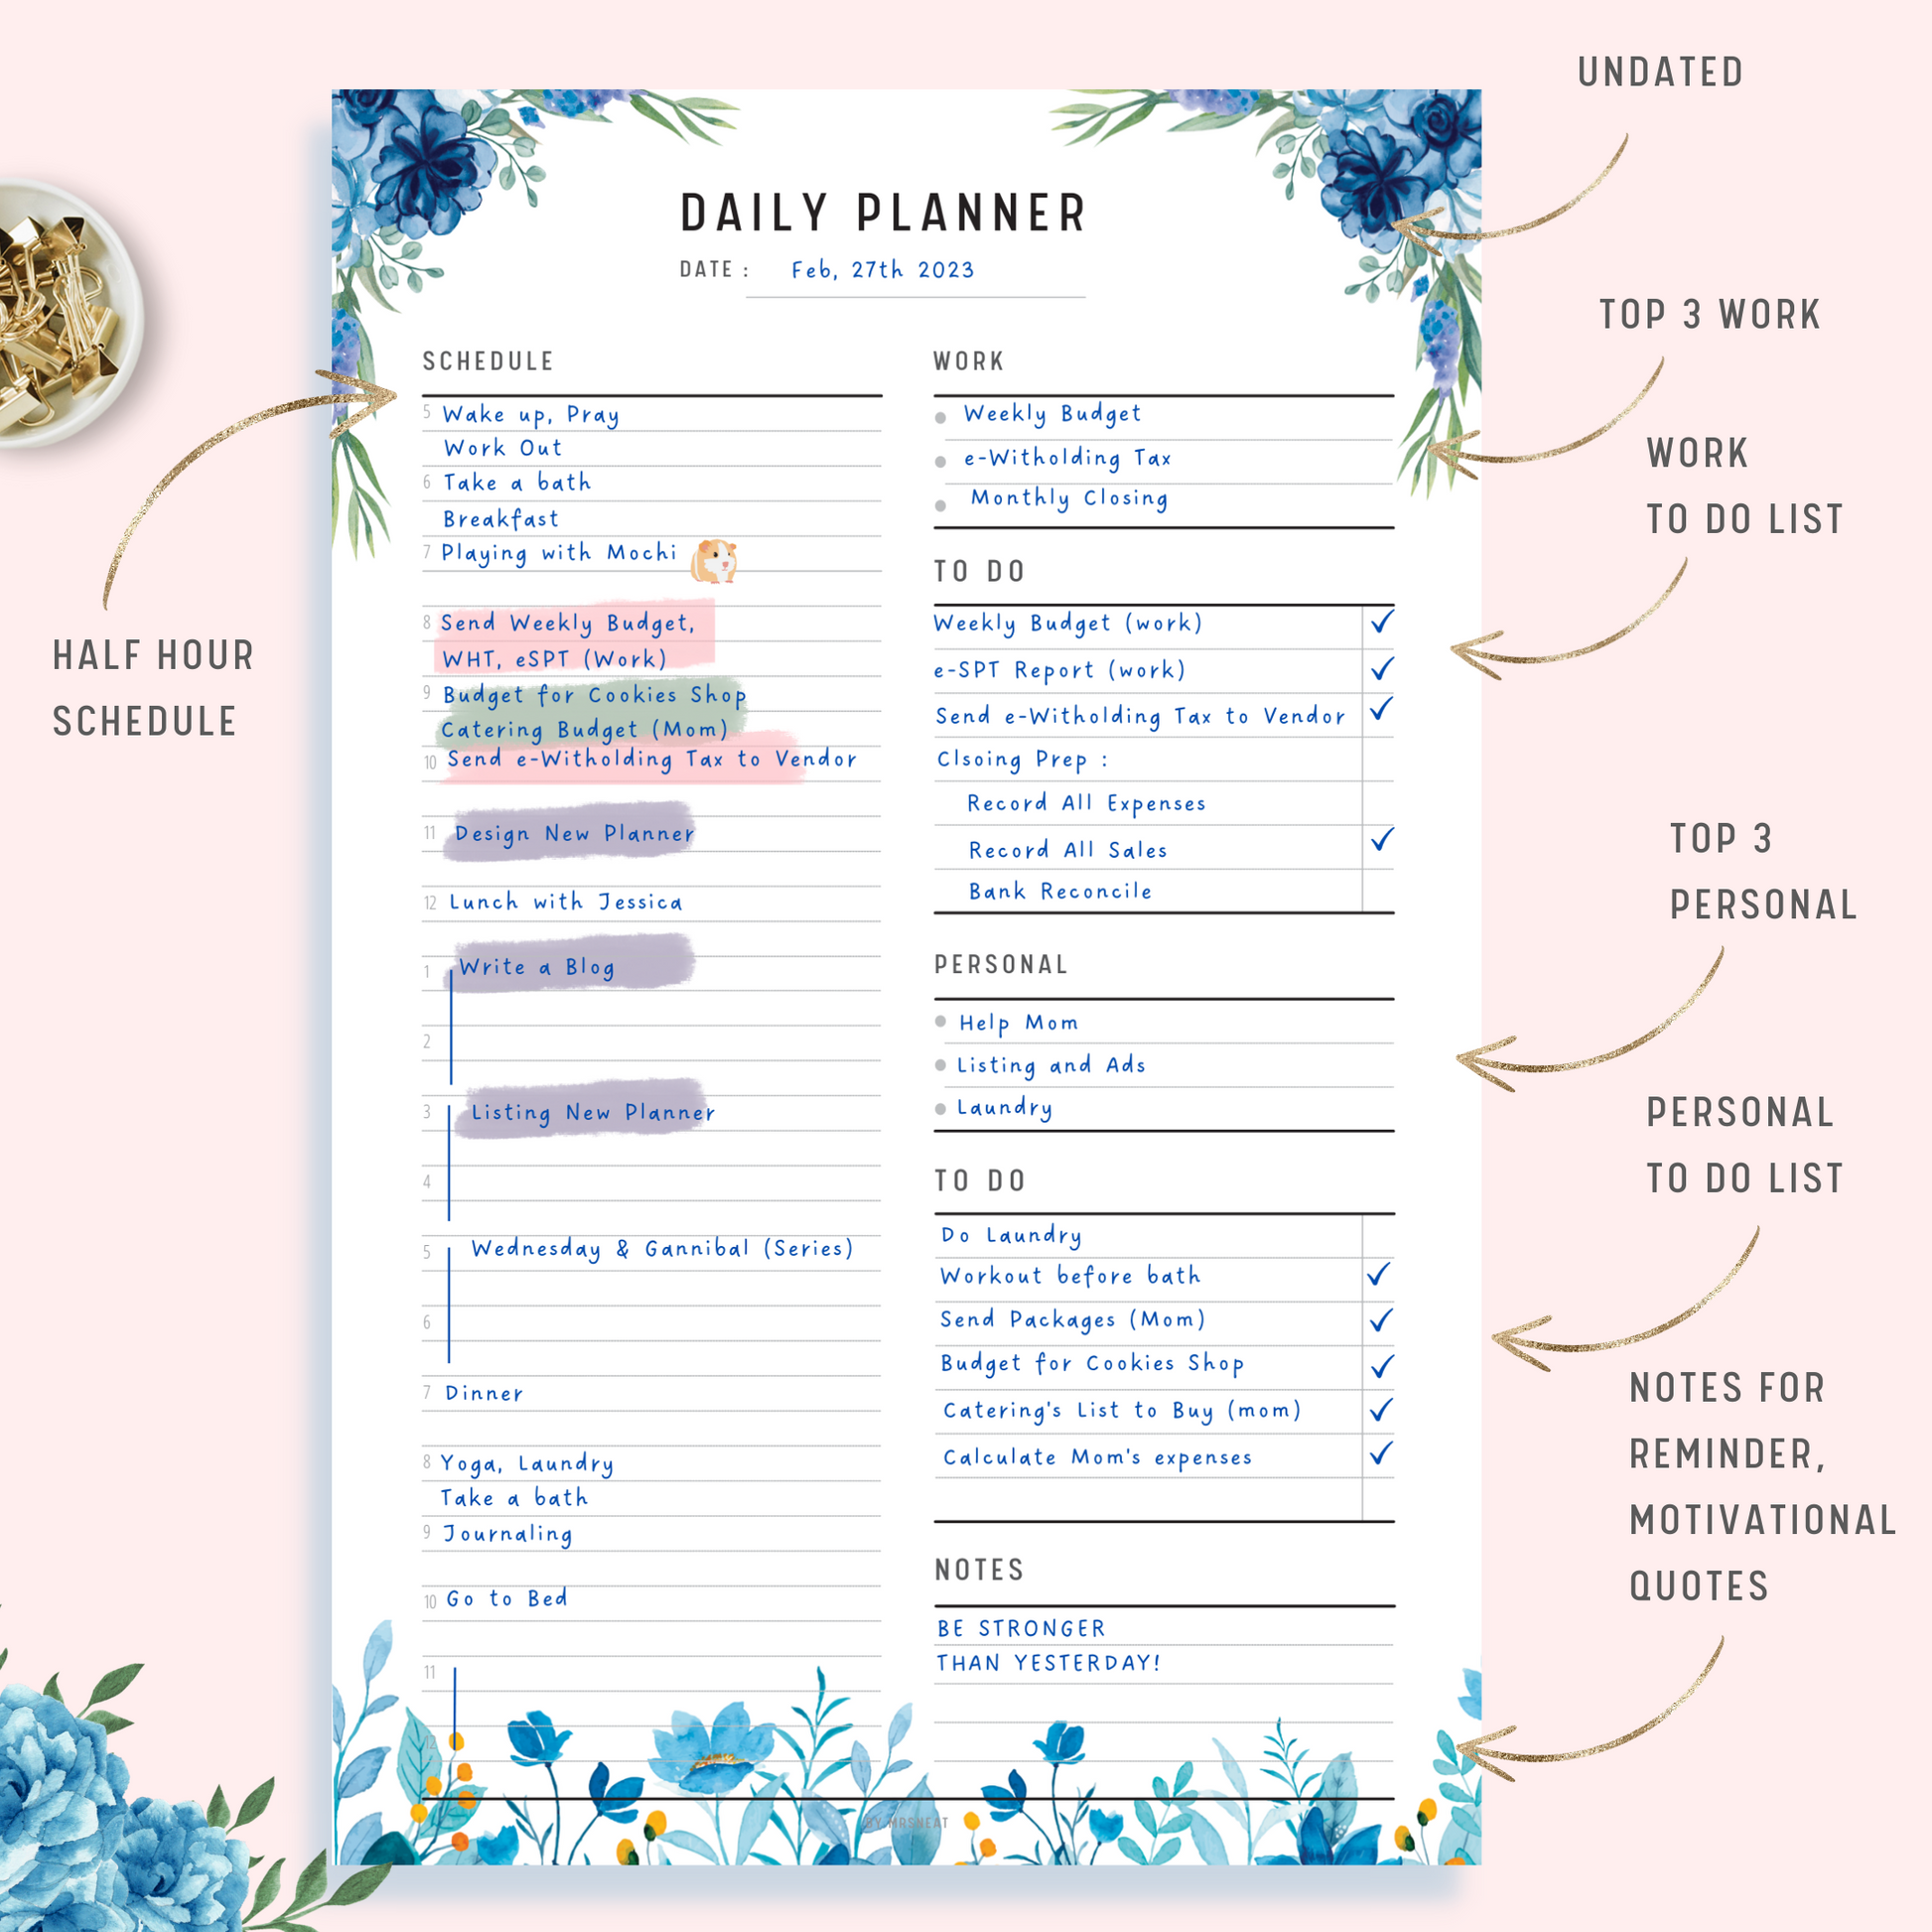 Blue Floral Daily Planner with Half Hour Schedule, Top 3 Priorities for Work and Personal